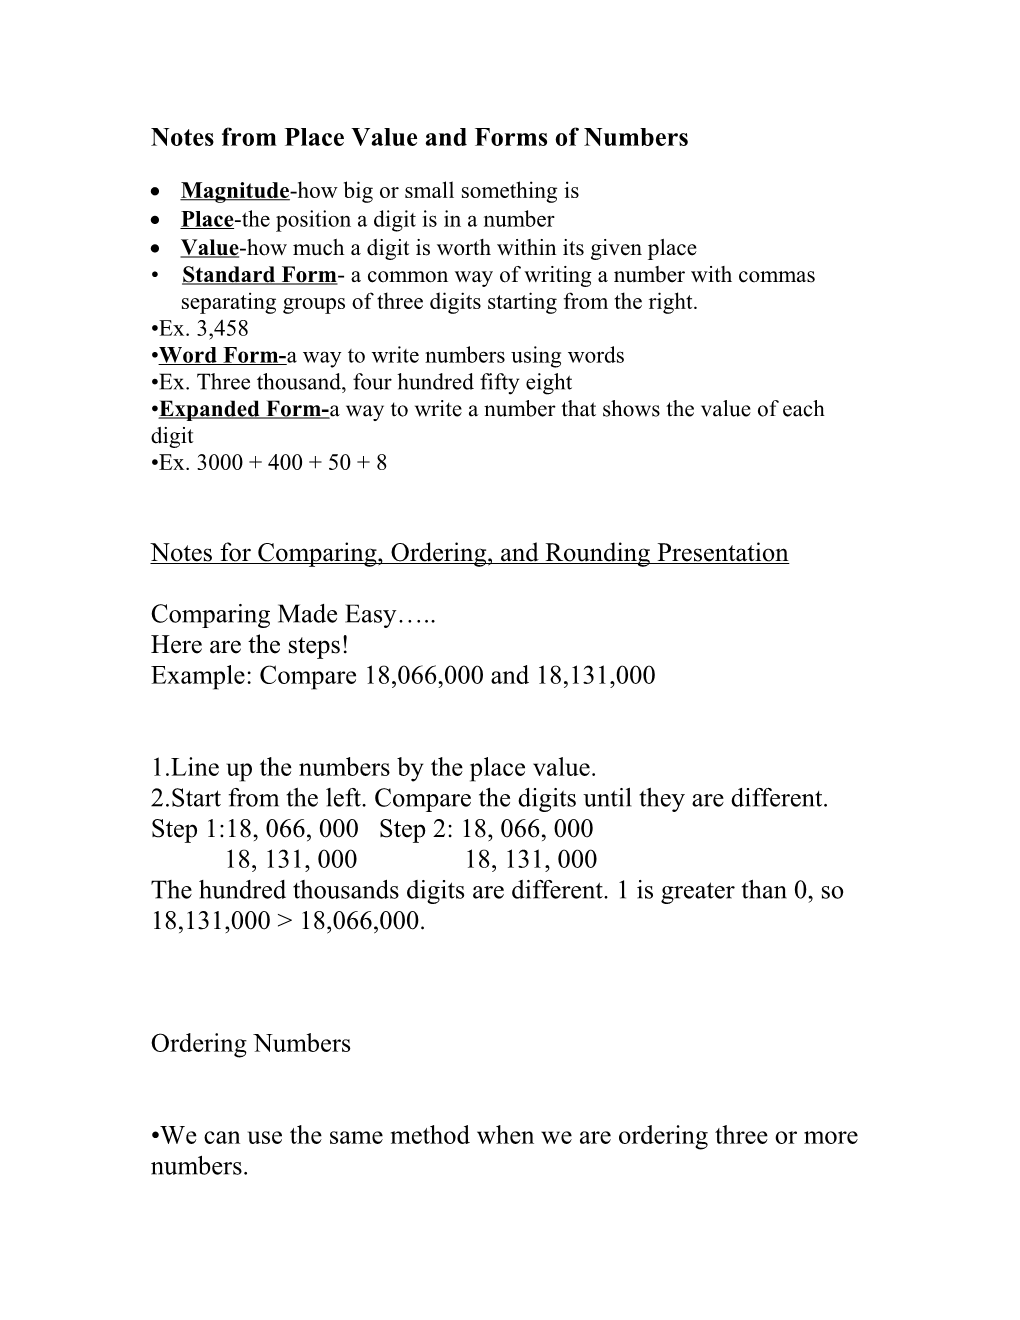 Notes for Comparing, Ordering, and Rounding Presentation